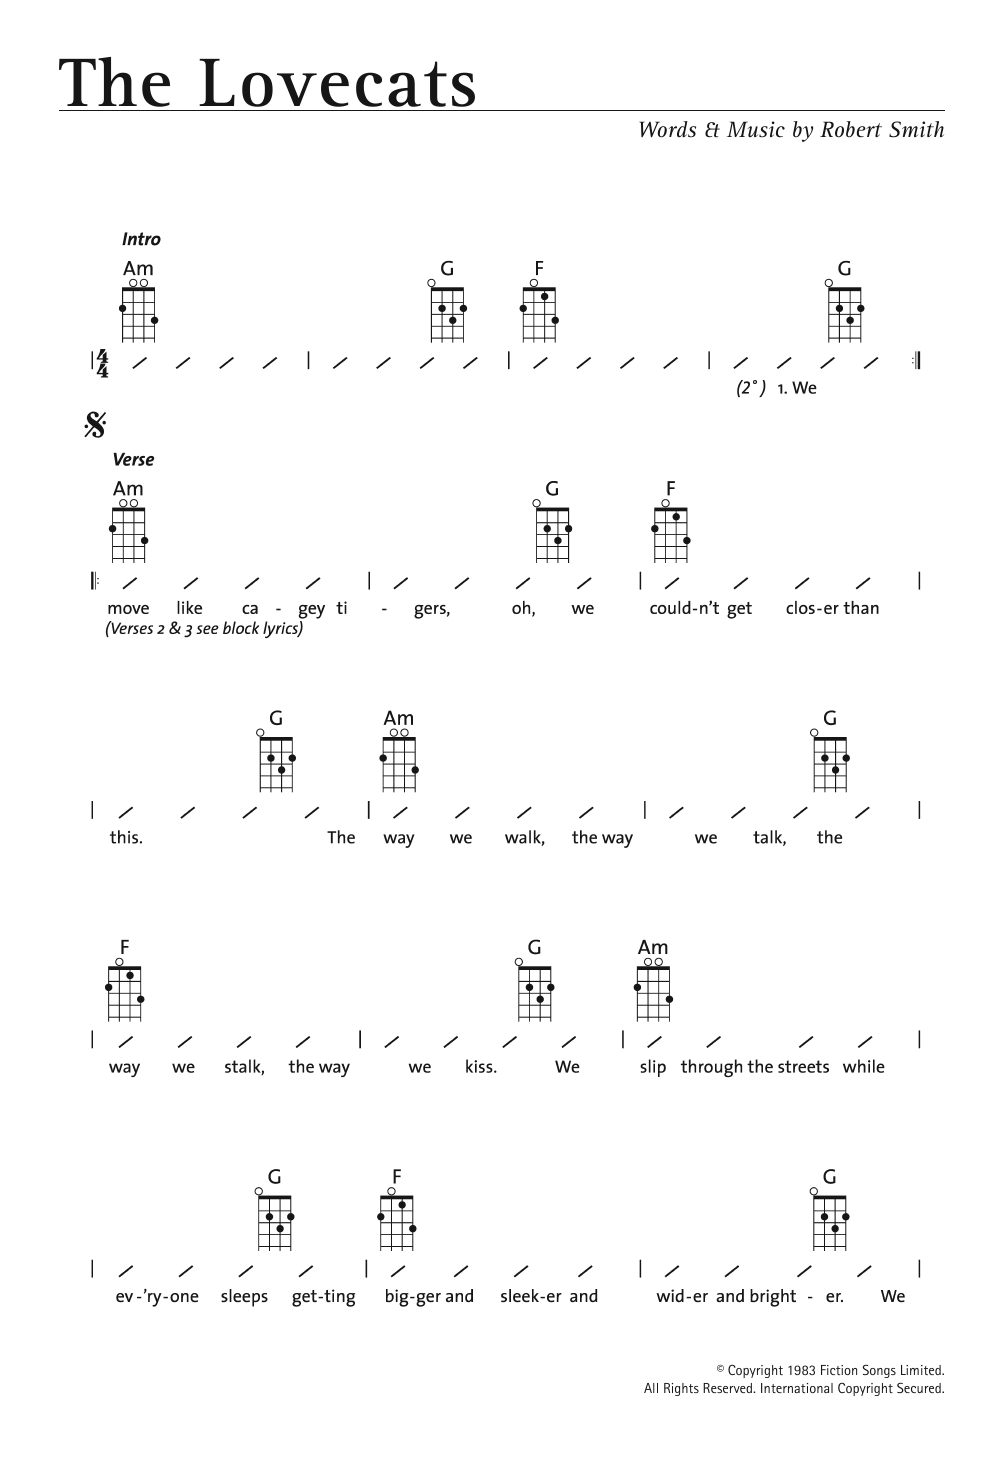 Download The Cure The Lovecats Sheet Music